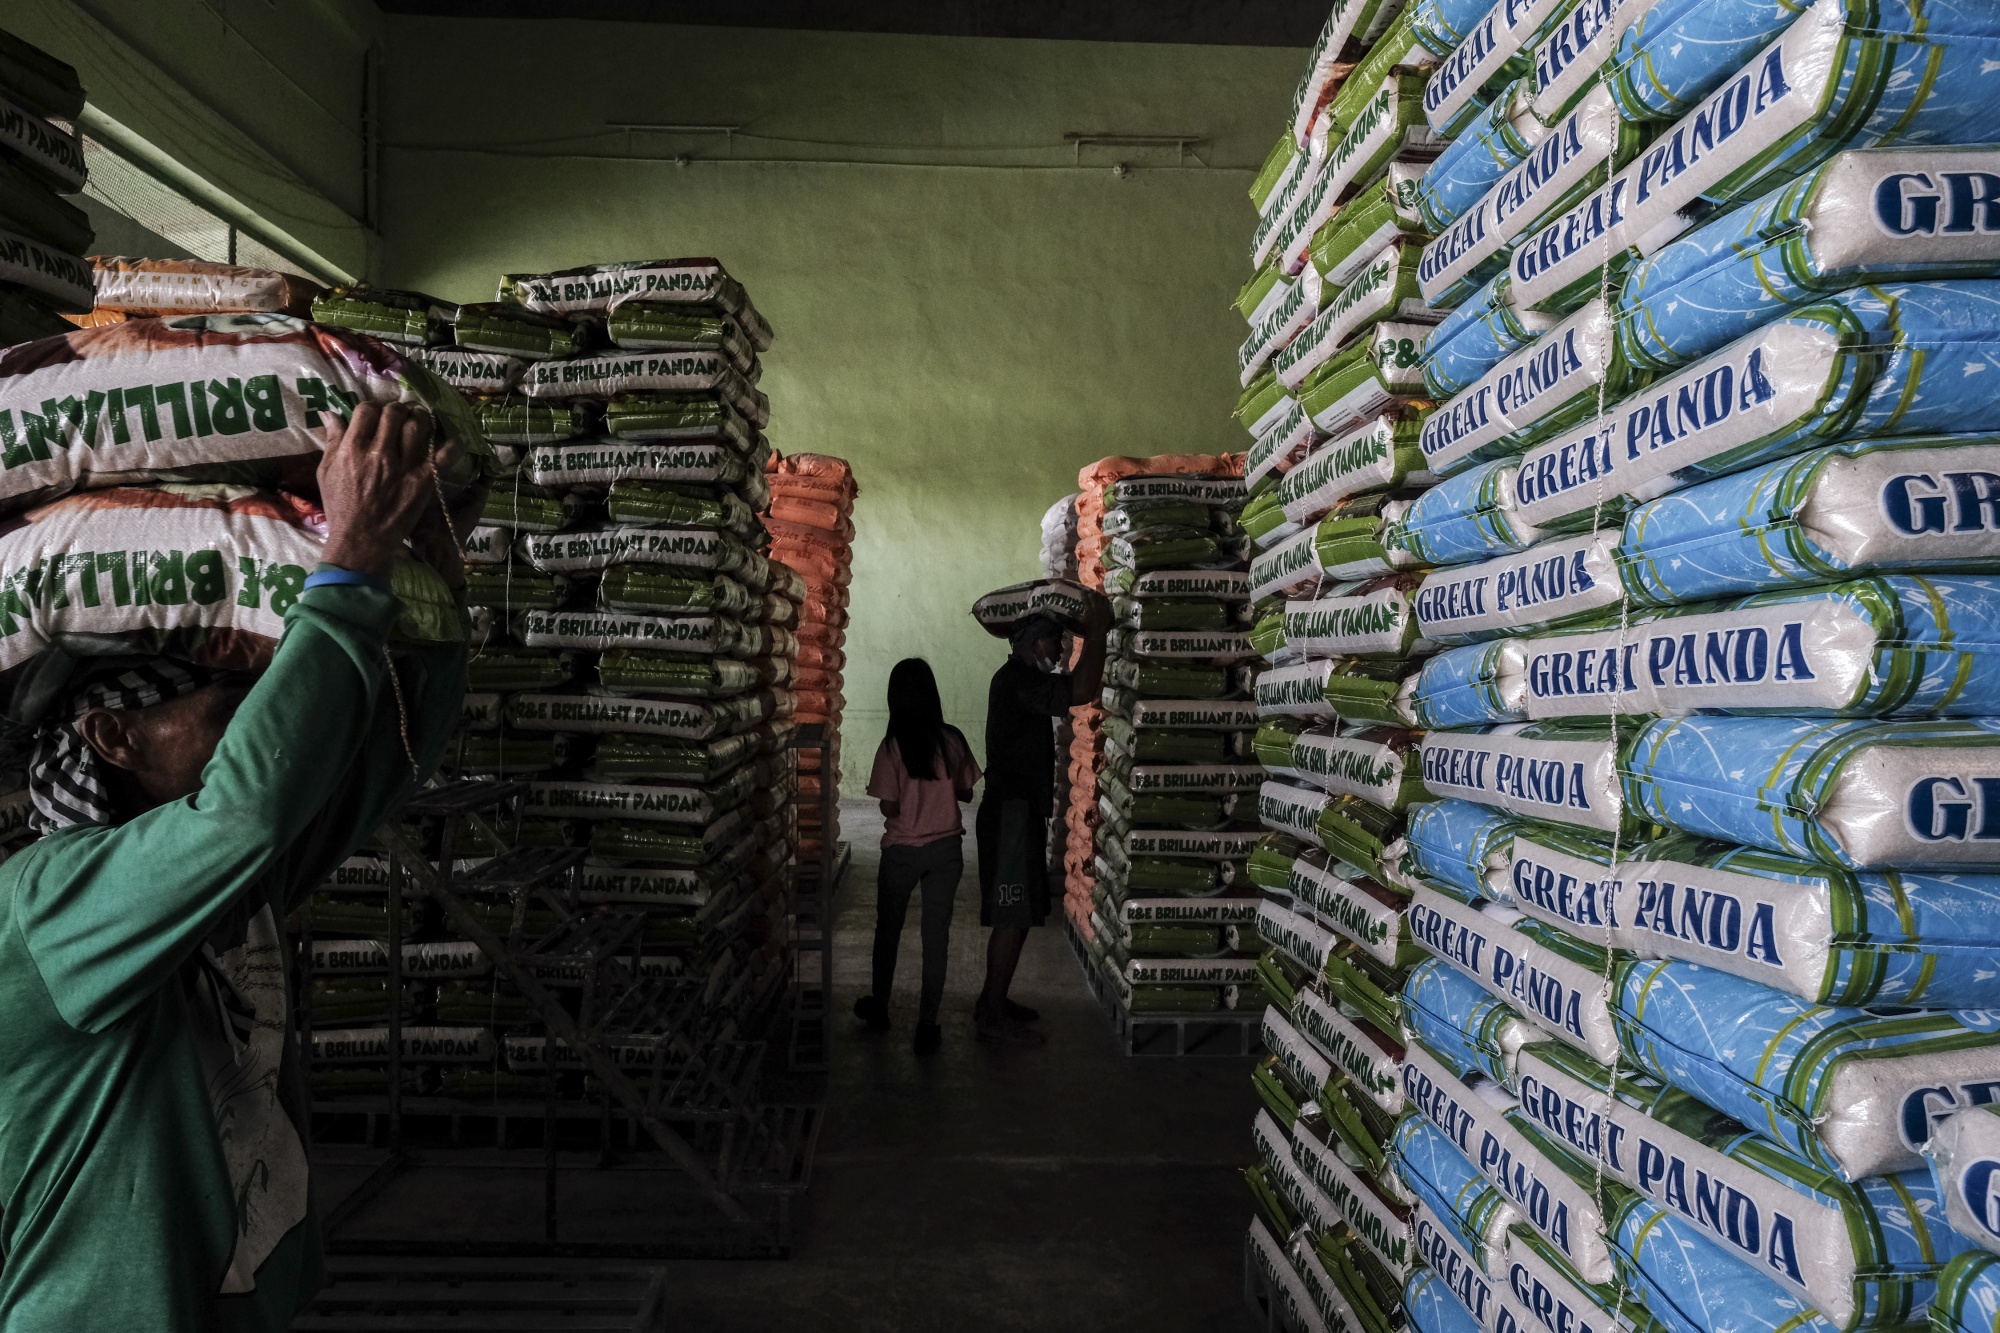 Rice Crisis In the Philippines Sounds Food Inflation Alarm Bells - Bloomberg